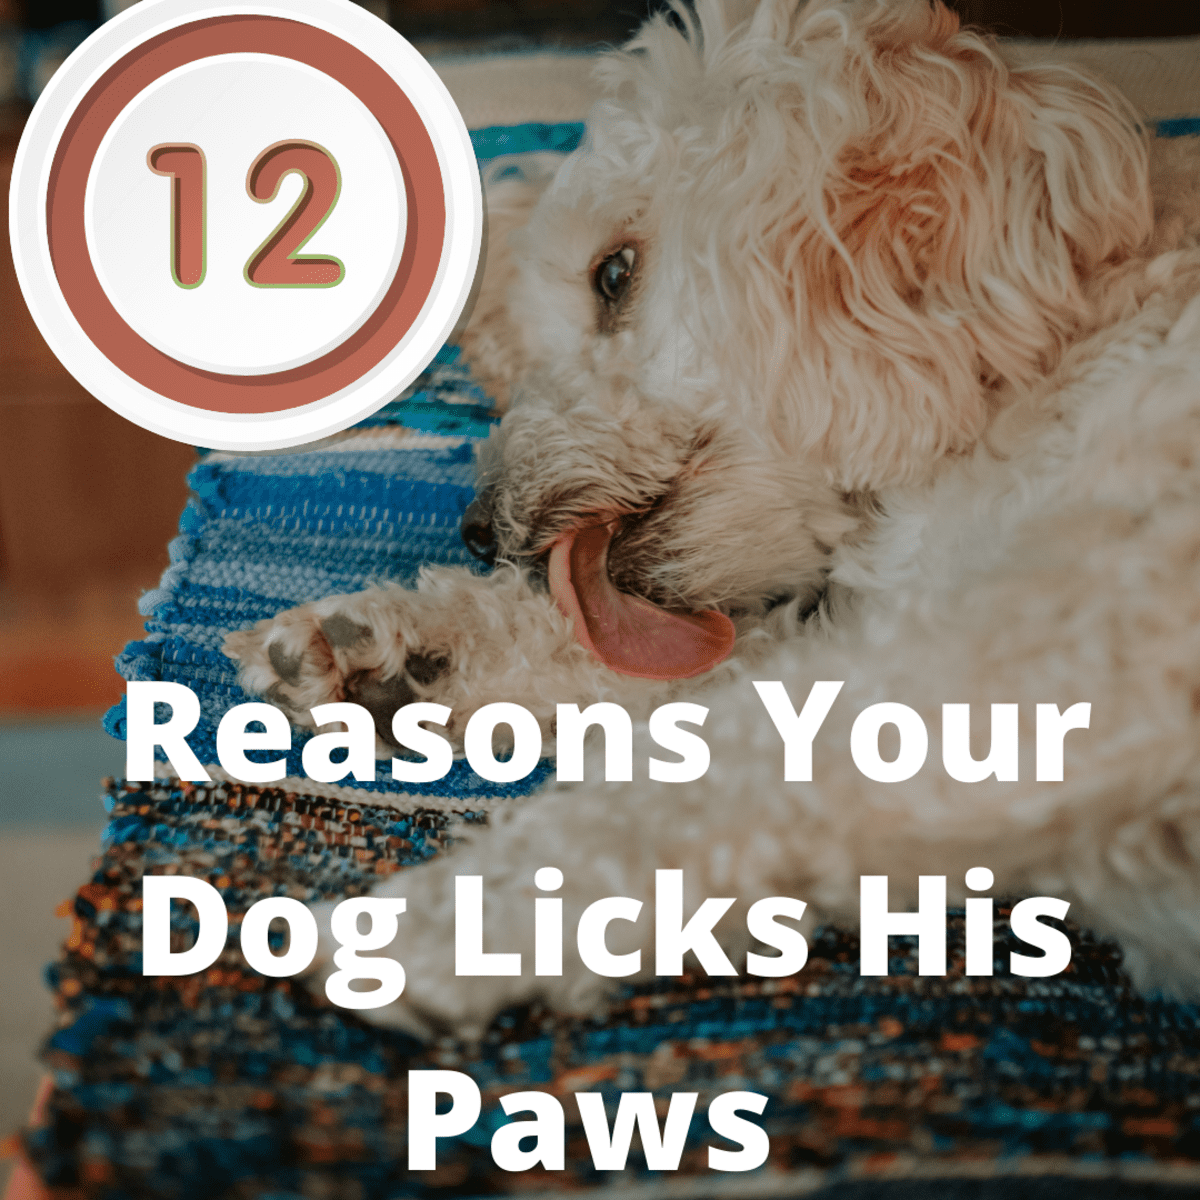 why does my dog bite me and then lick me